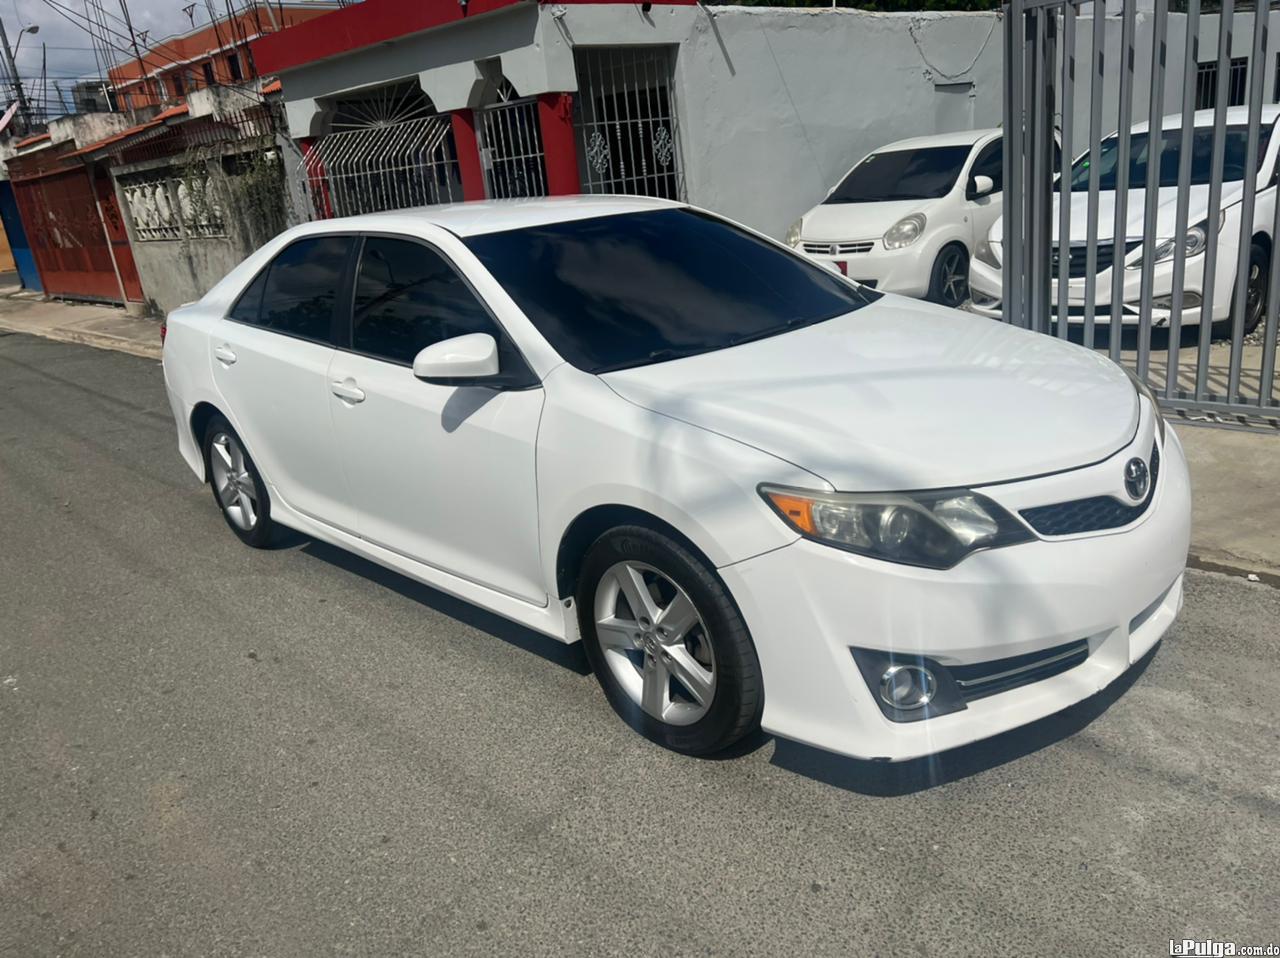 Toyota Camry Se  2014 inicial 269 mil Foto 7138856-1.jpg